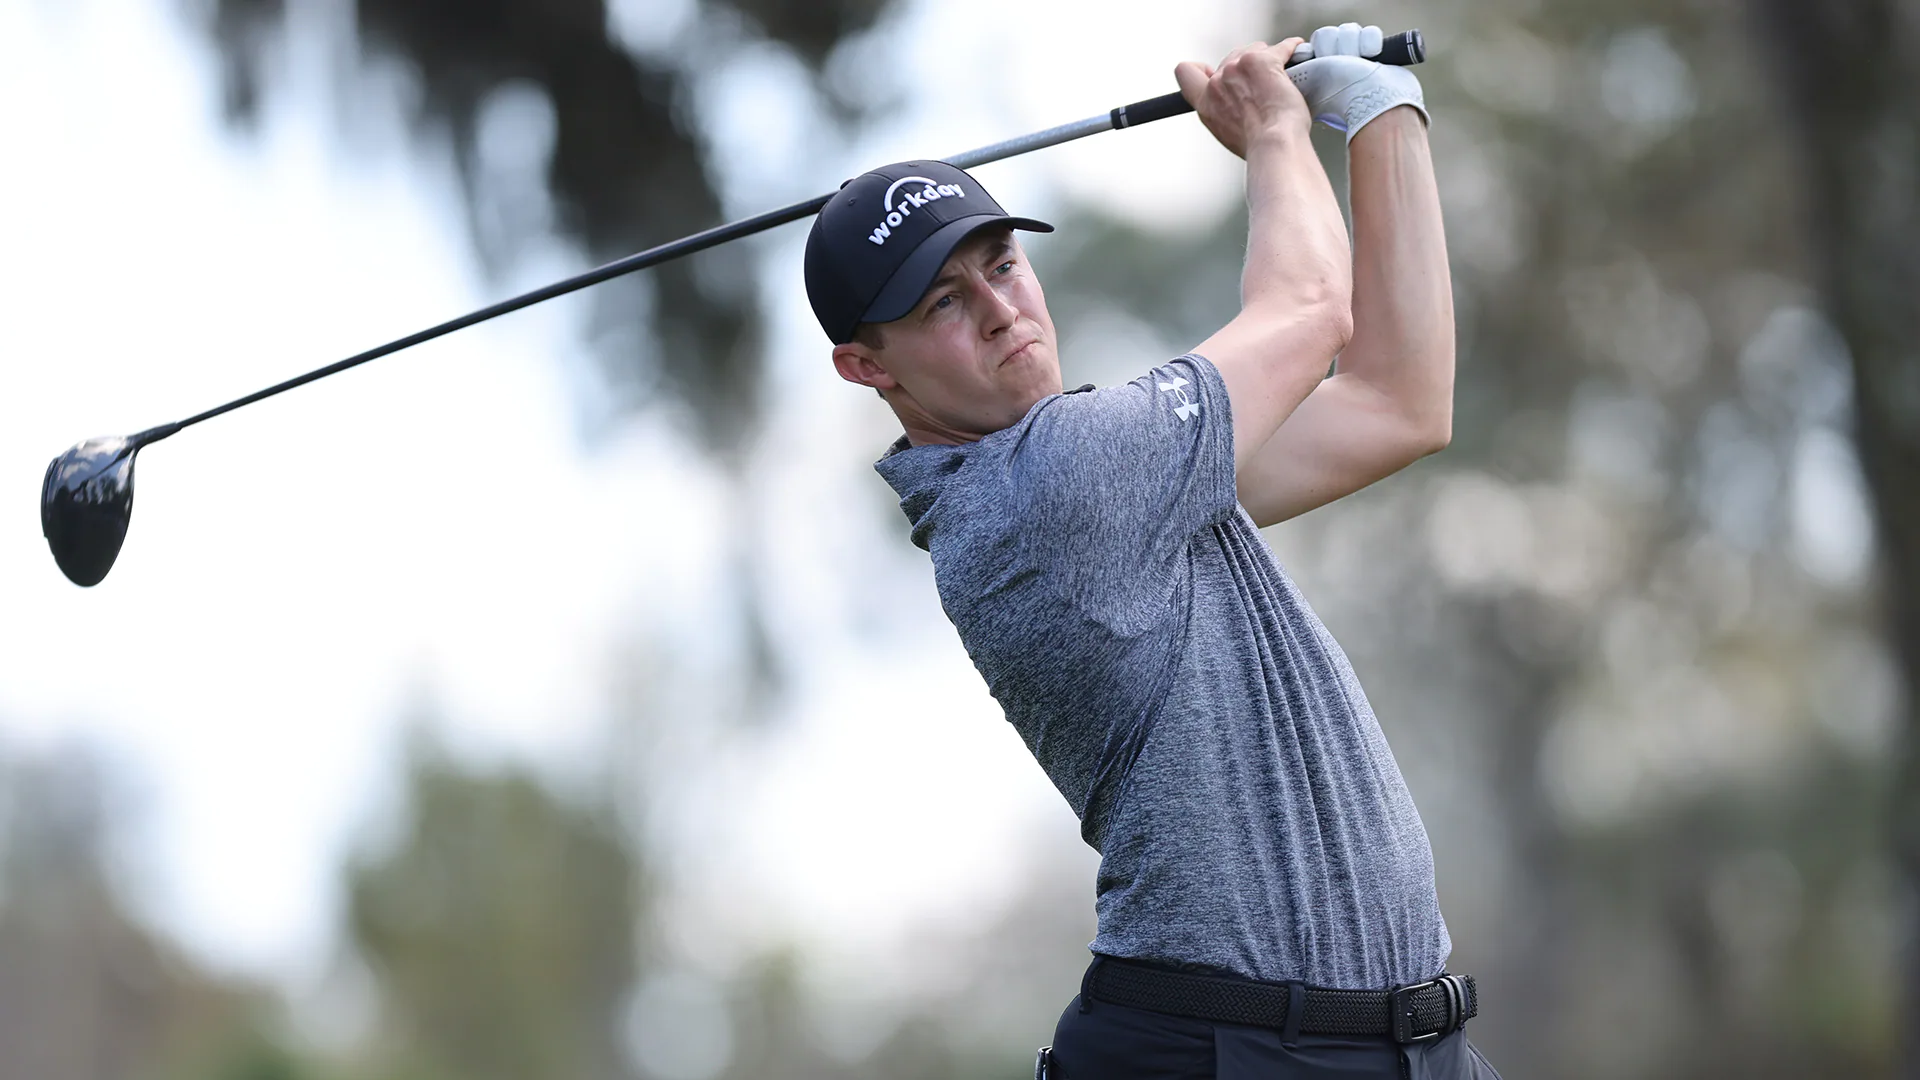 After ‘skill’ comments, Matthew Fitzpatrick gets distance advice from Bryson DeChambeau